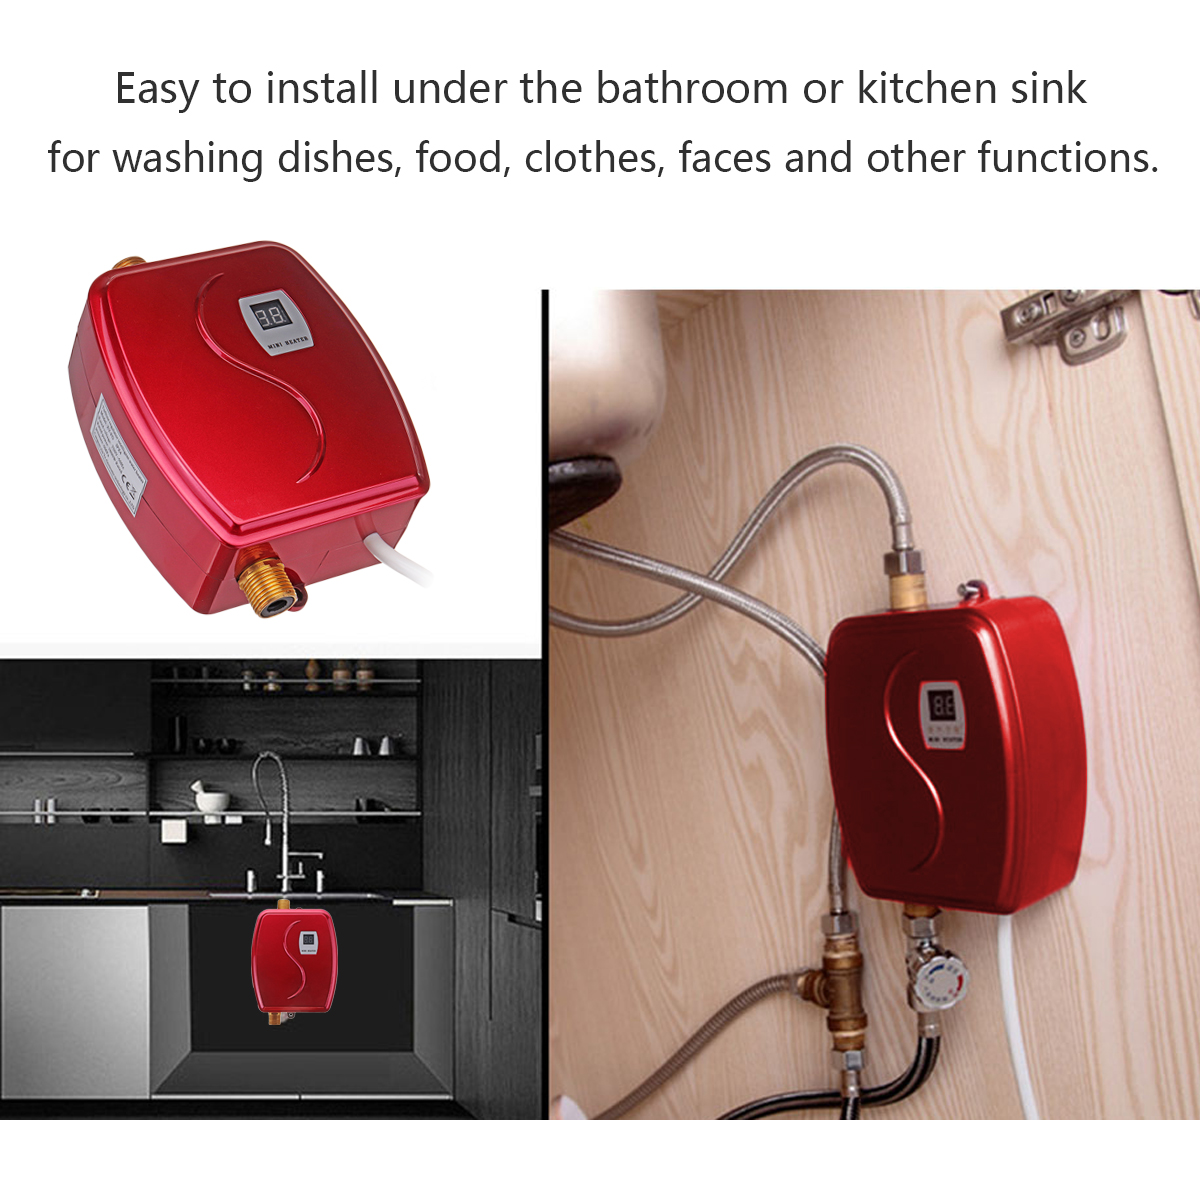 3800W-3000W-Mini-Tankless-Instant-Hot-Water-Heater-Faucet-kitchen-Heating-Thermostat-1366830-6